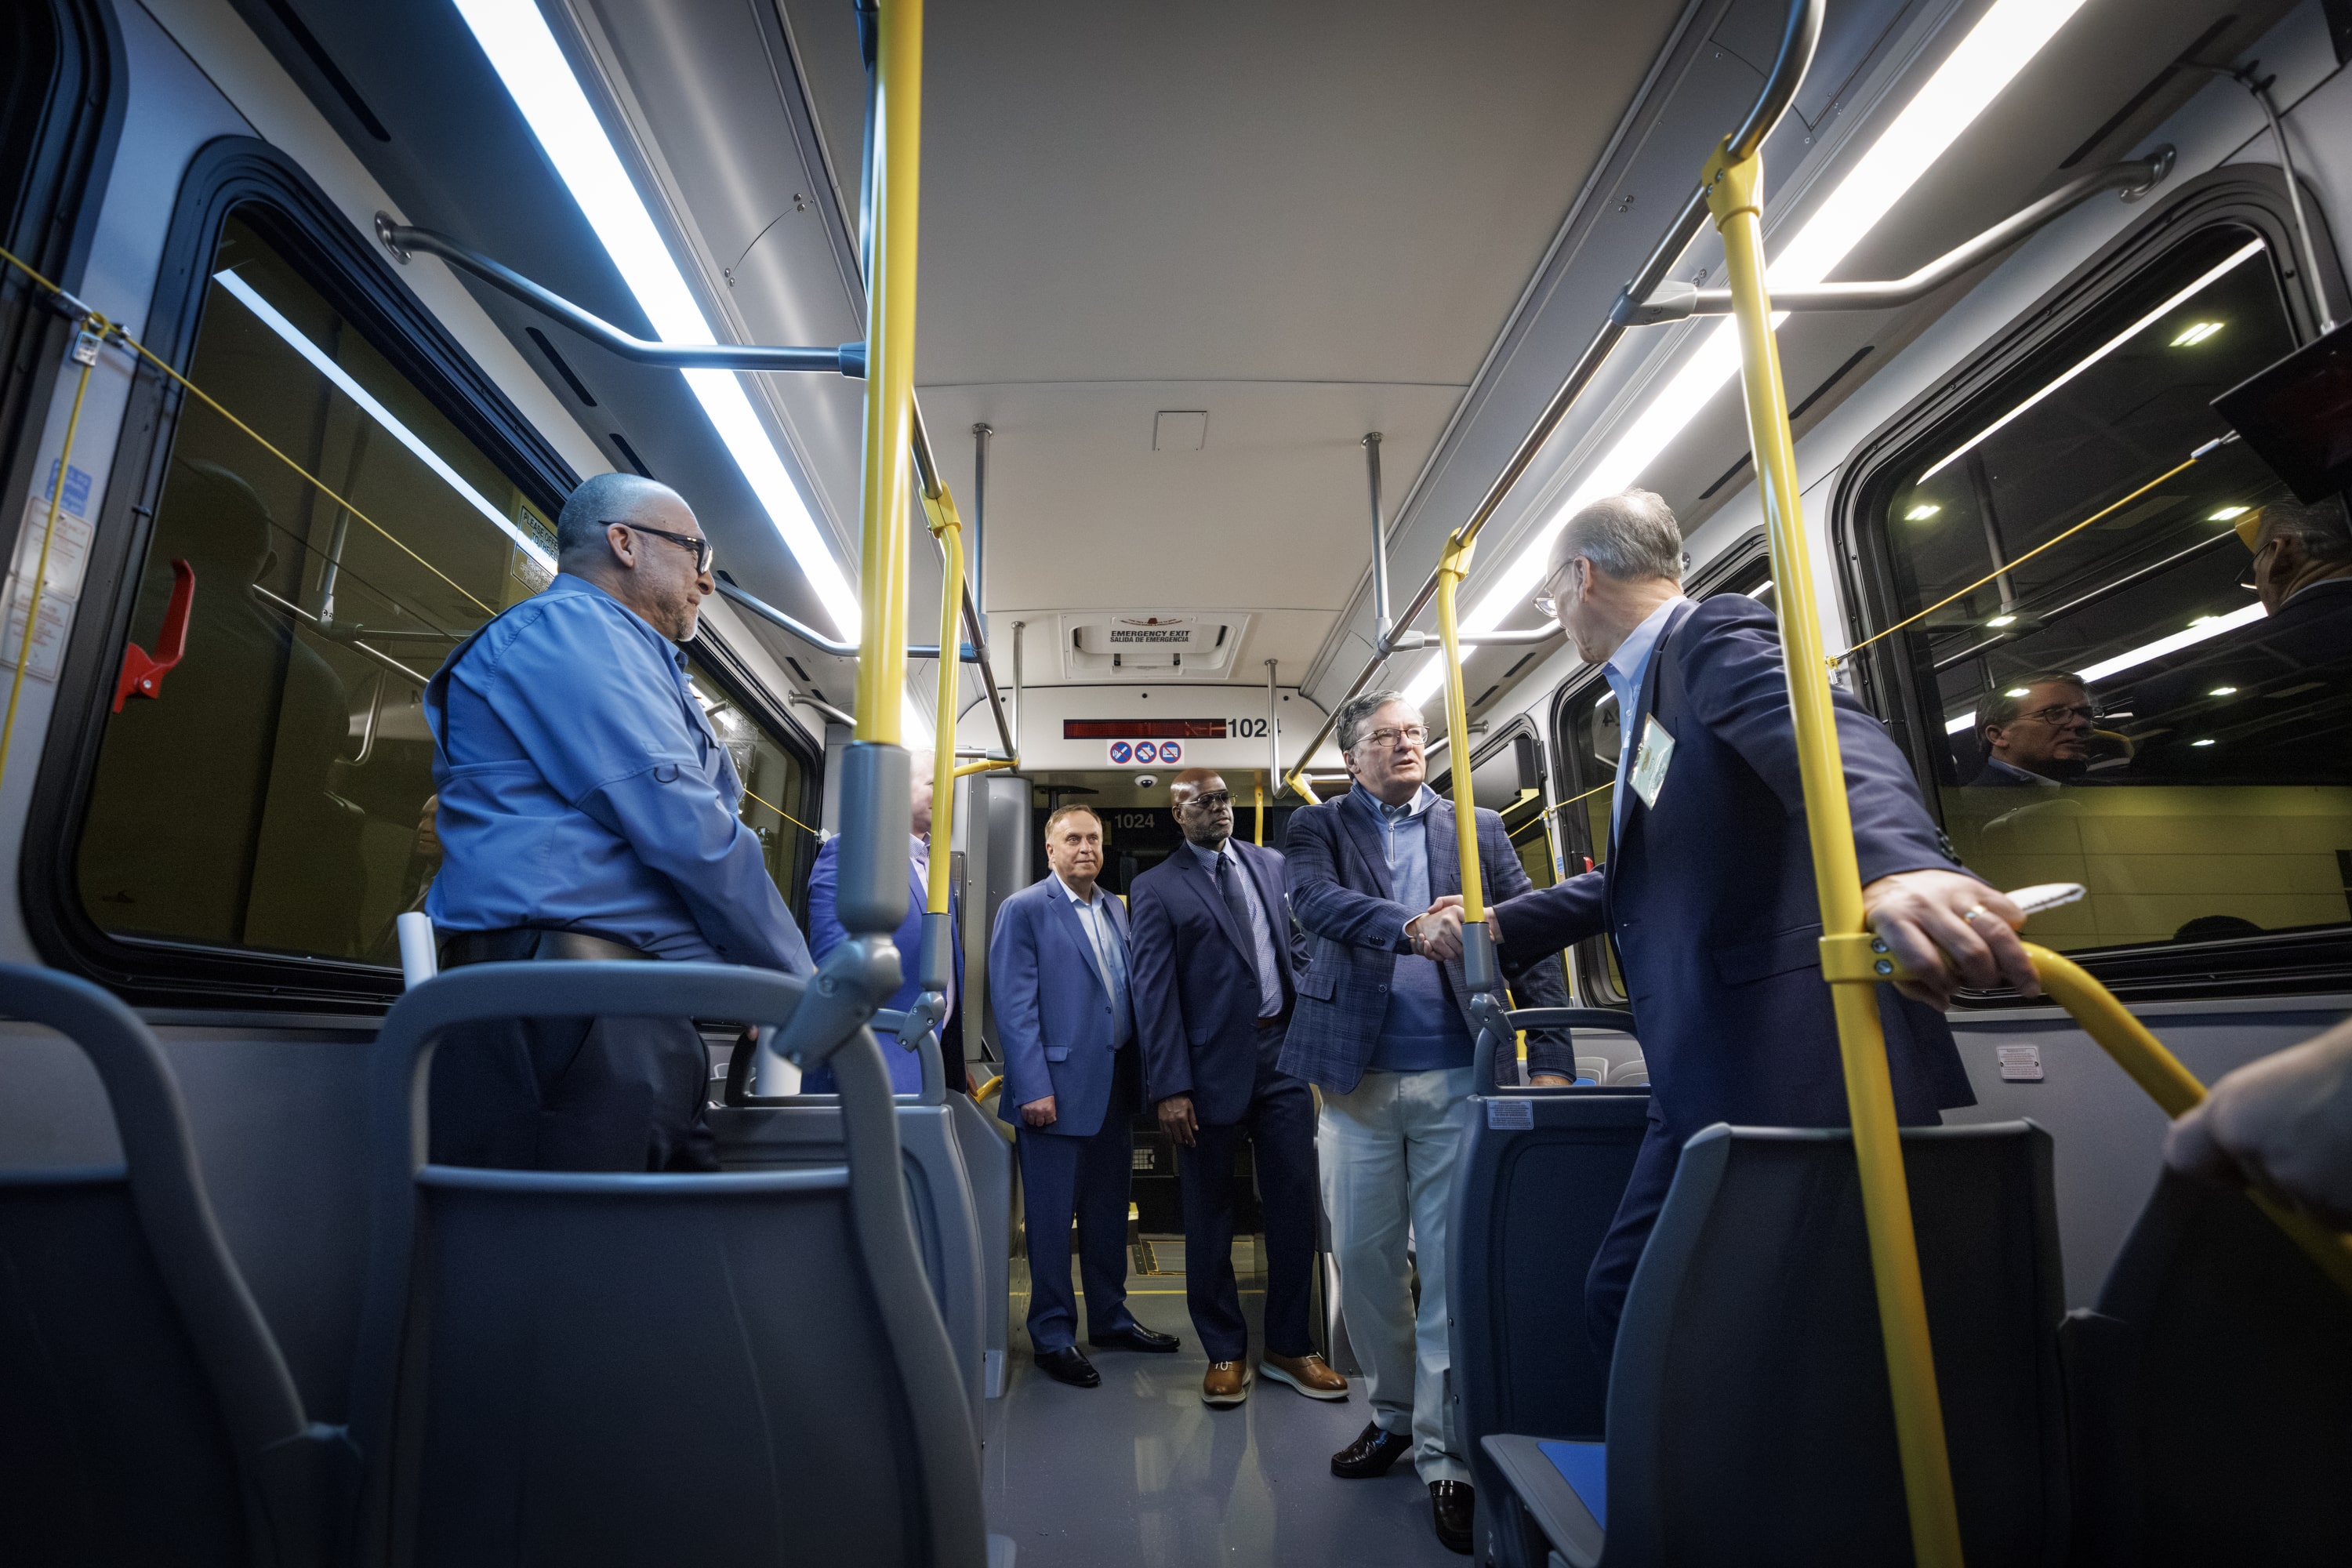 An image of five men in suits standing inside a public transit bus shaking hands and talking with one another